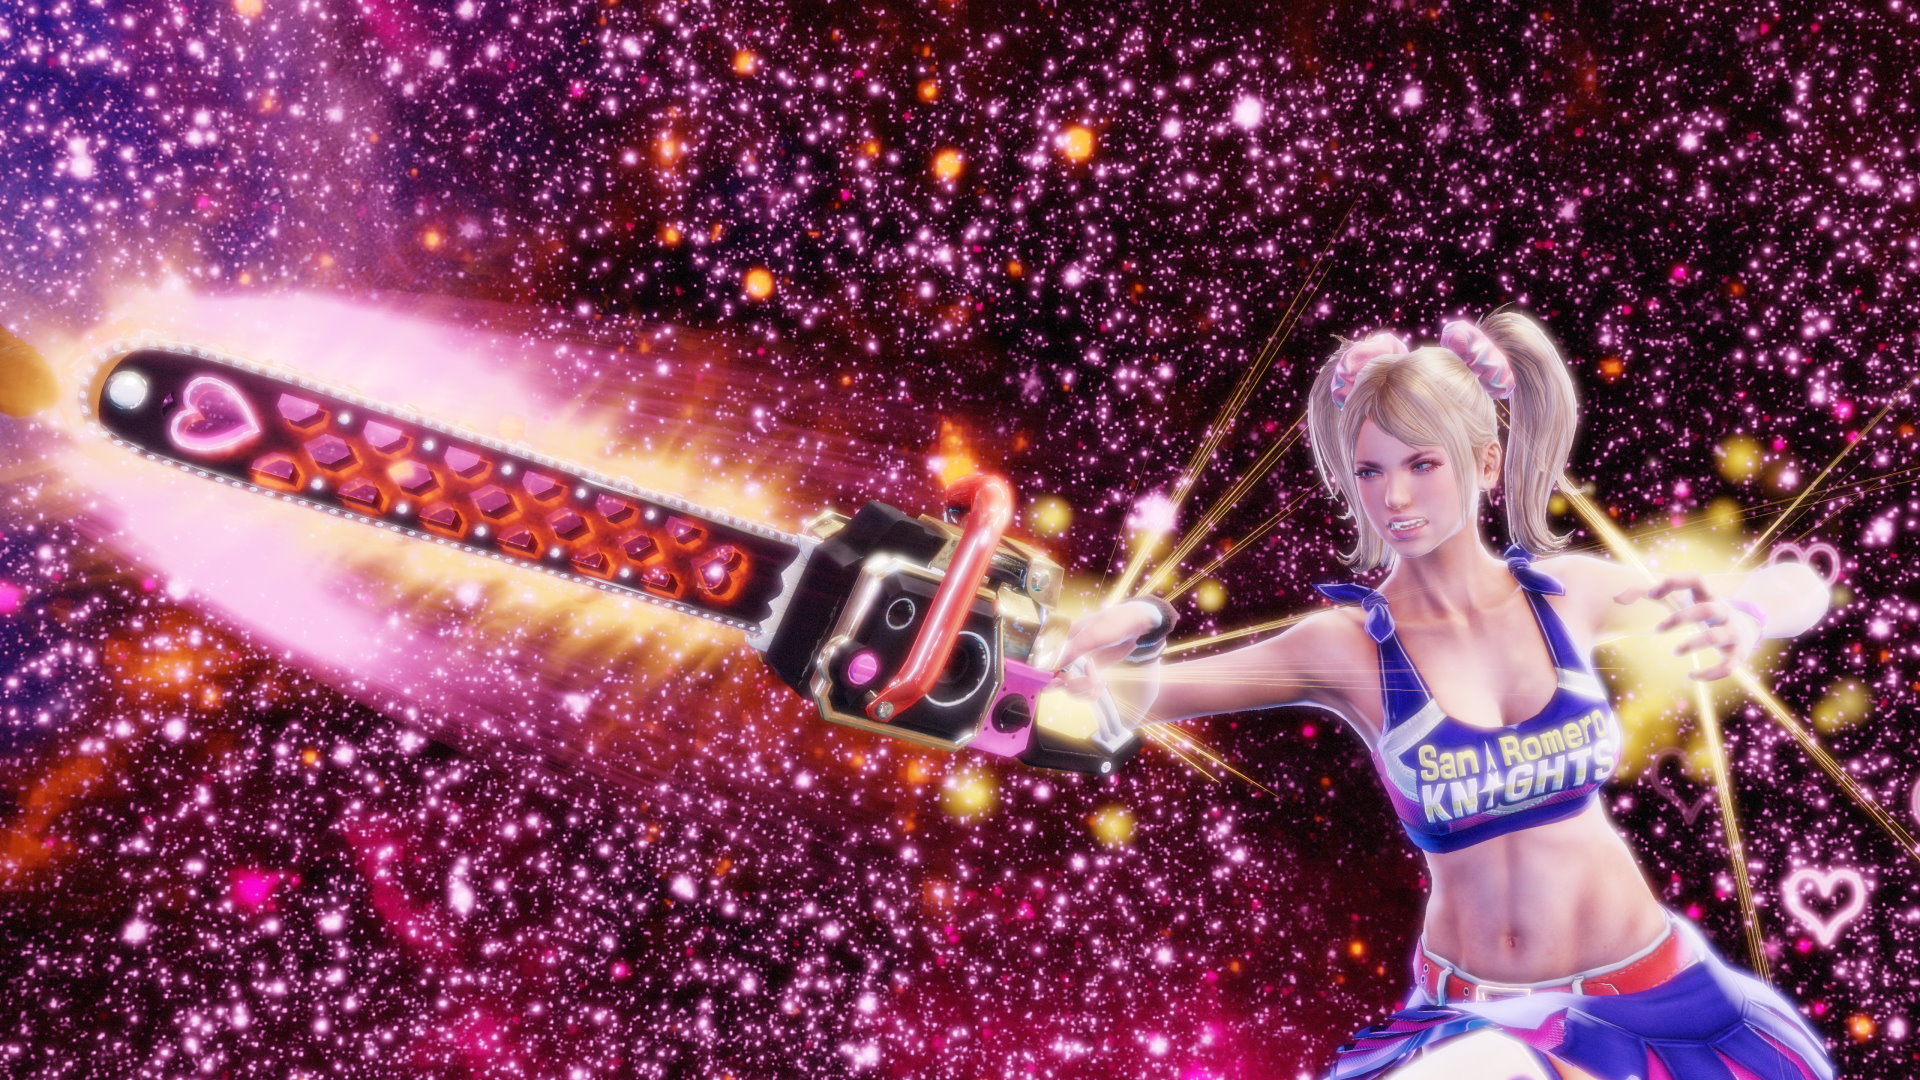 Lollipop Chainsaw remake promises realism in 2023.